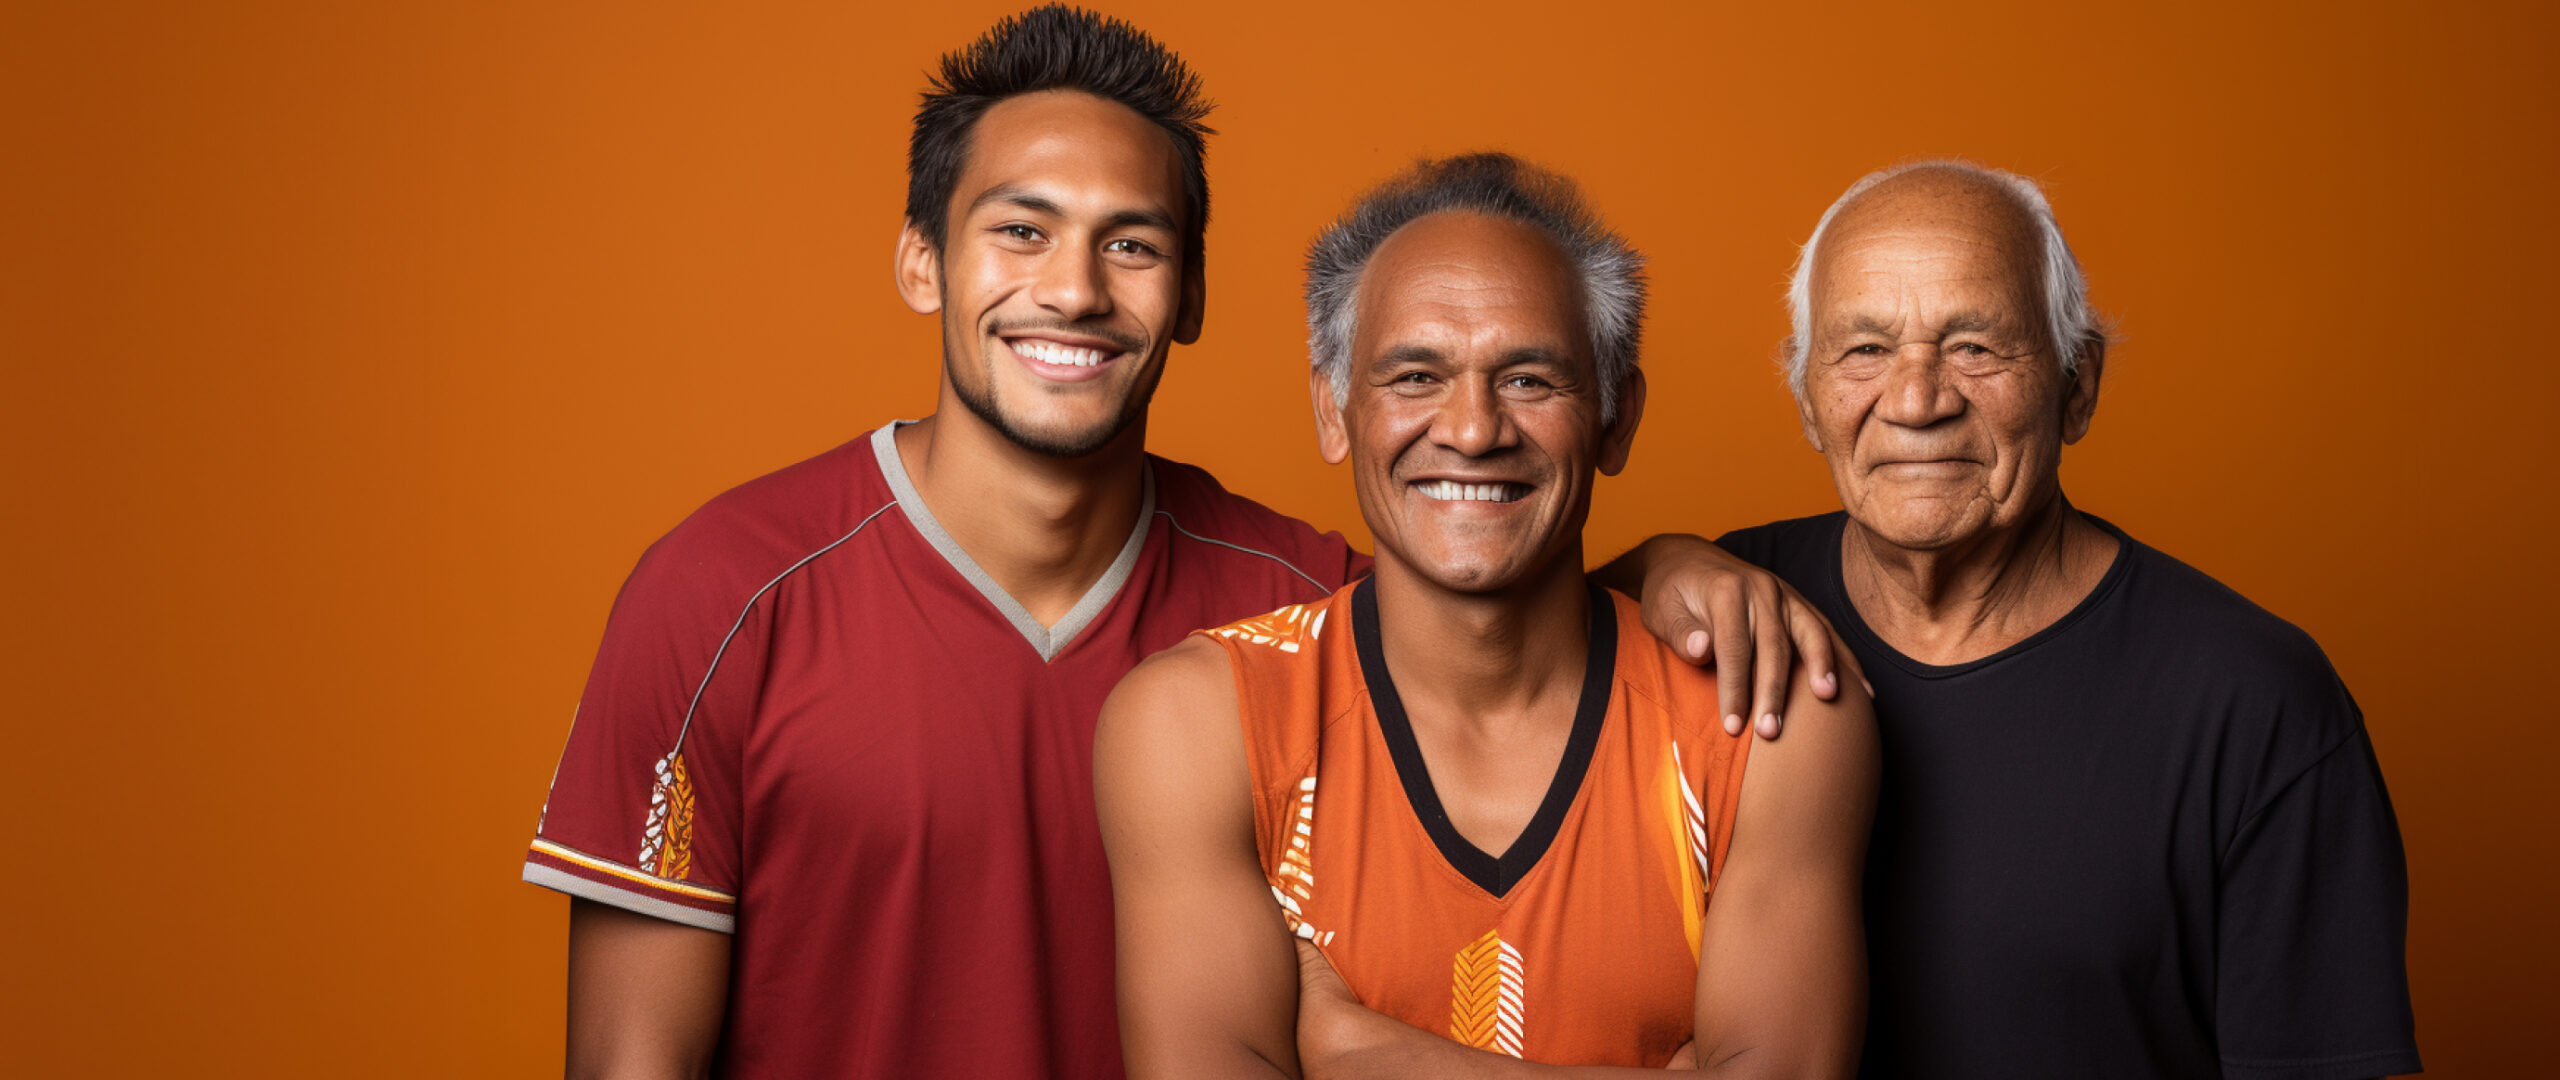 Three men of different generations smiling, standing shoulder-to-shoulder against an orange background. The young man on the left wears a red shirt, the middle-aged man in the center wears an orange tank top, and the elderly man on the right wears a black shirt.